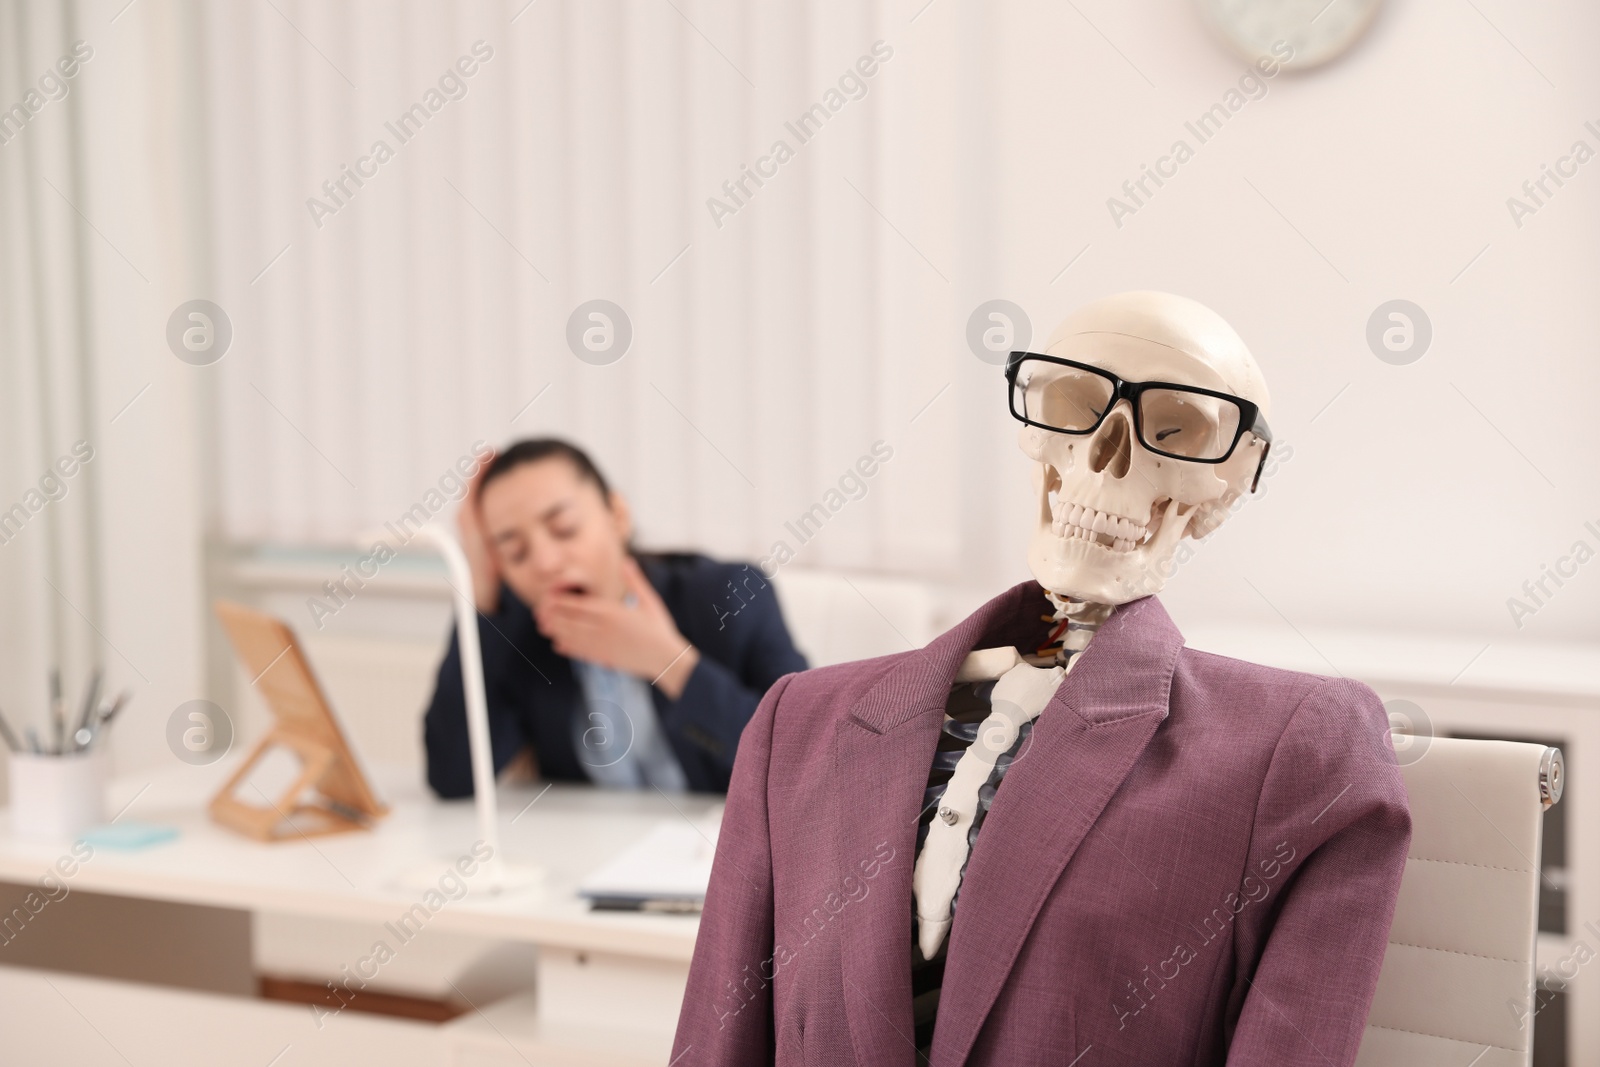 Photo of Human skeleton with suit and glasses in office. Space for text